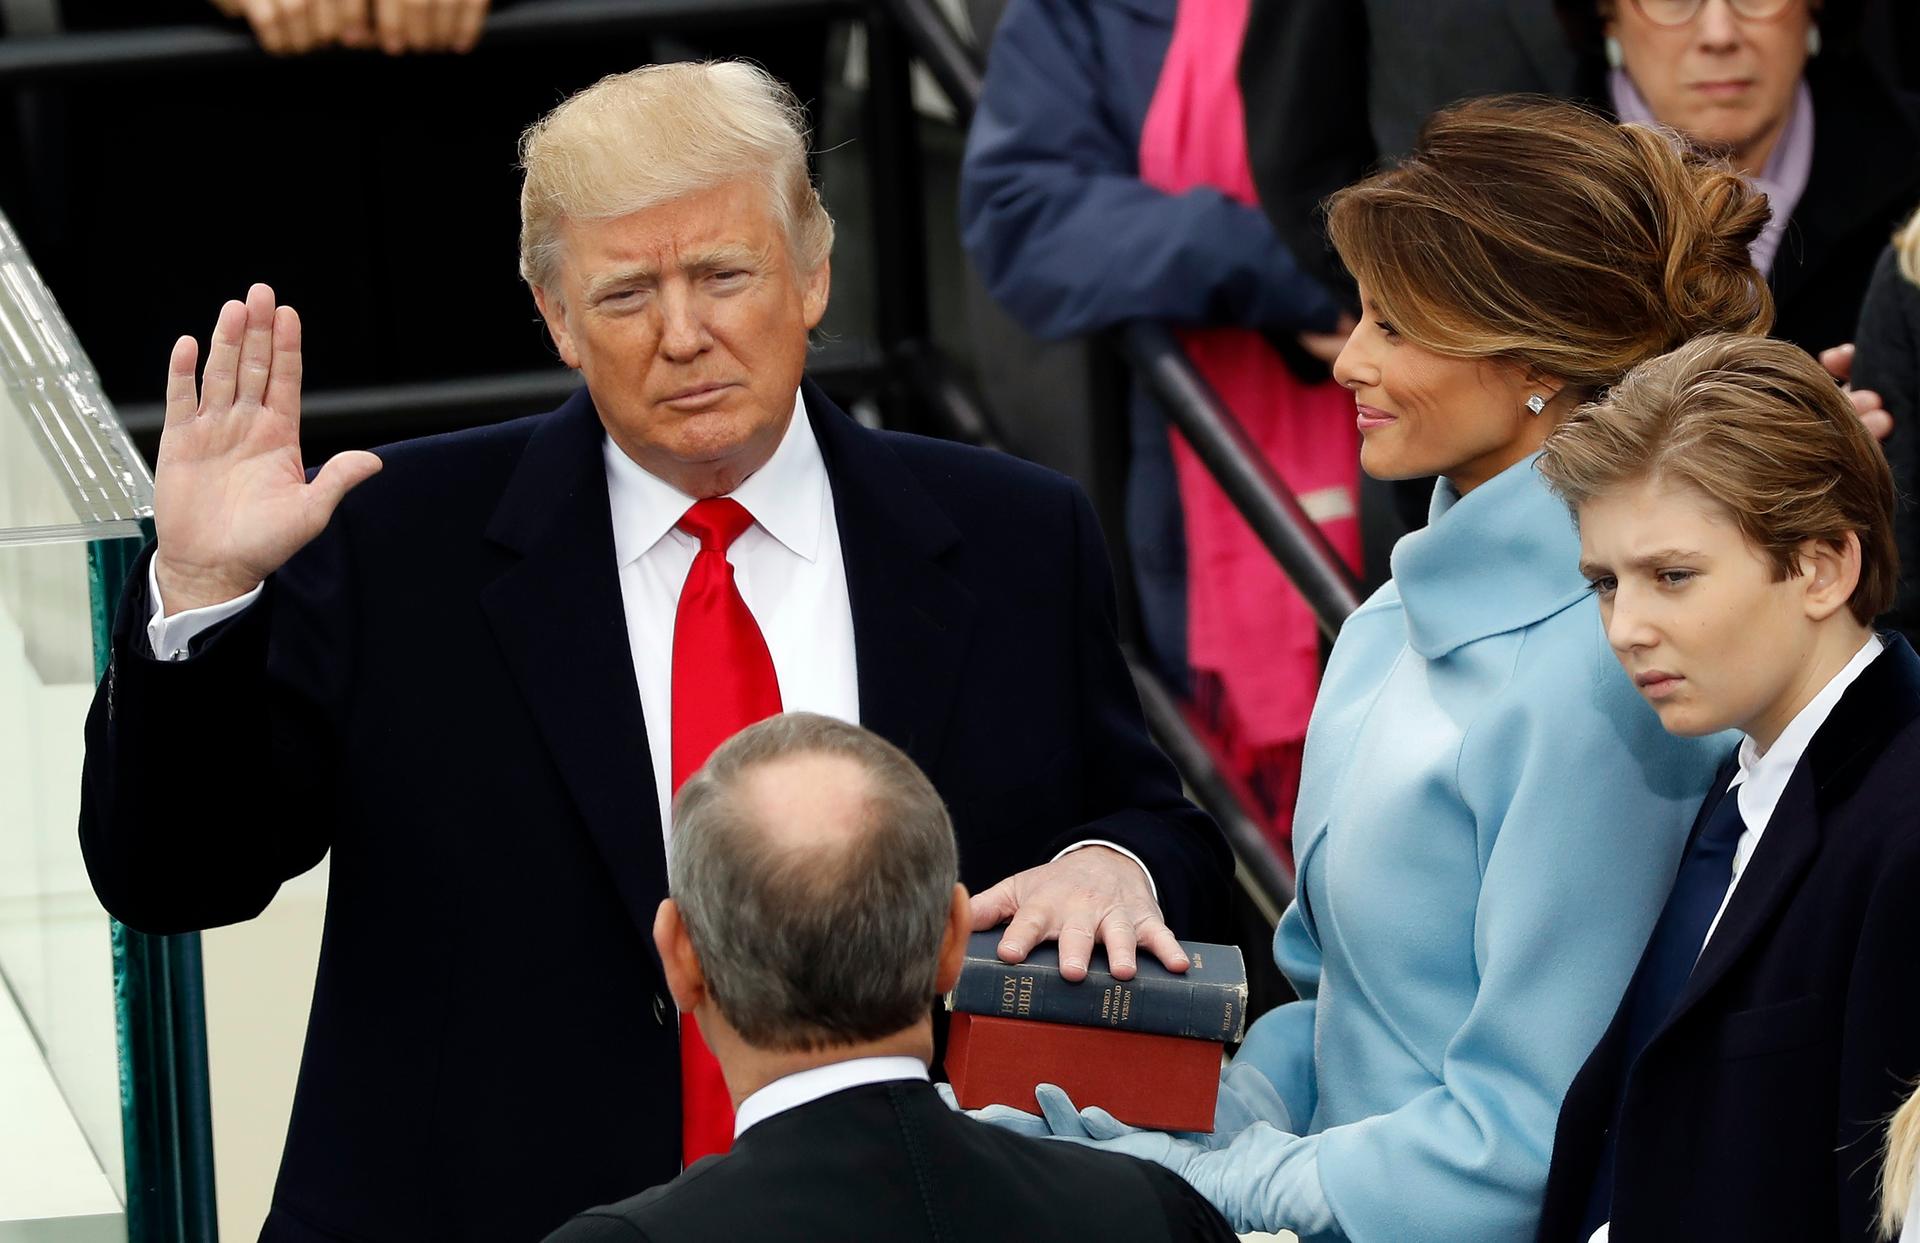 Donald Trump taking the oath of office